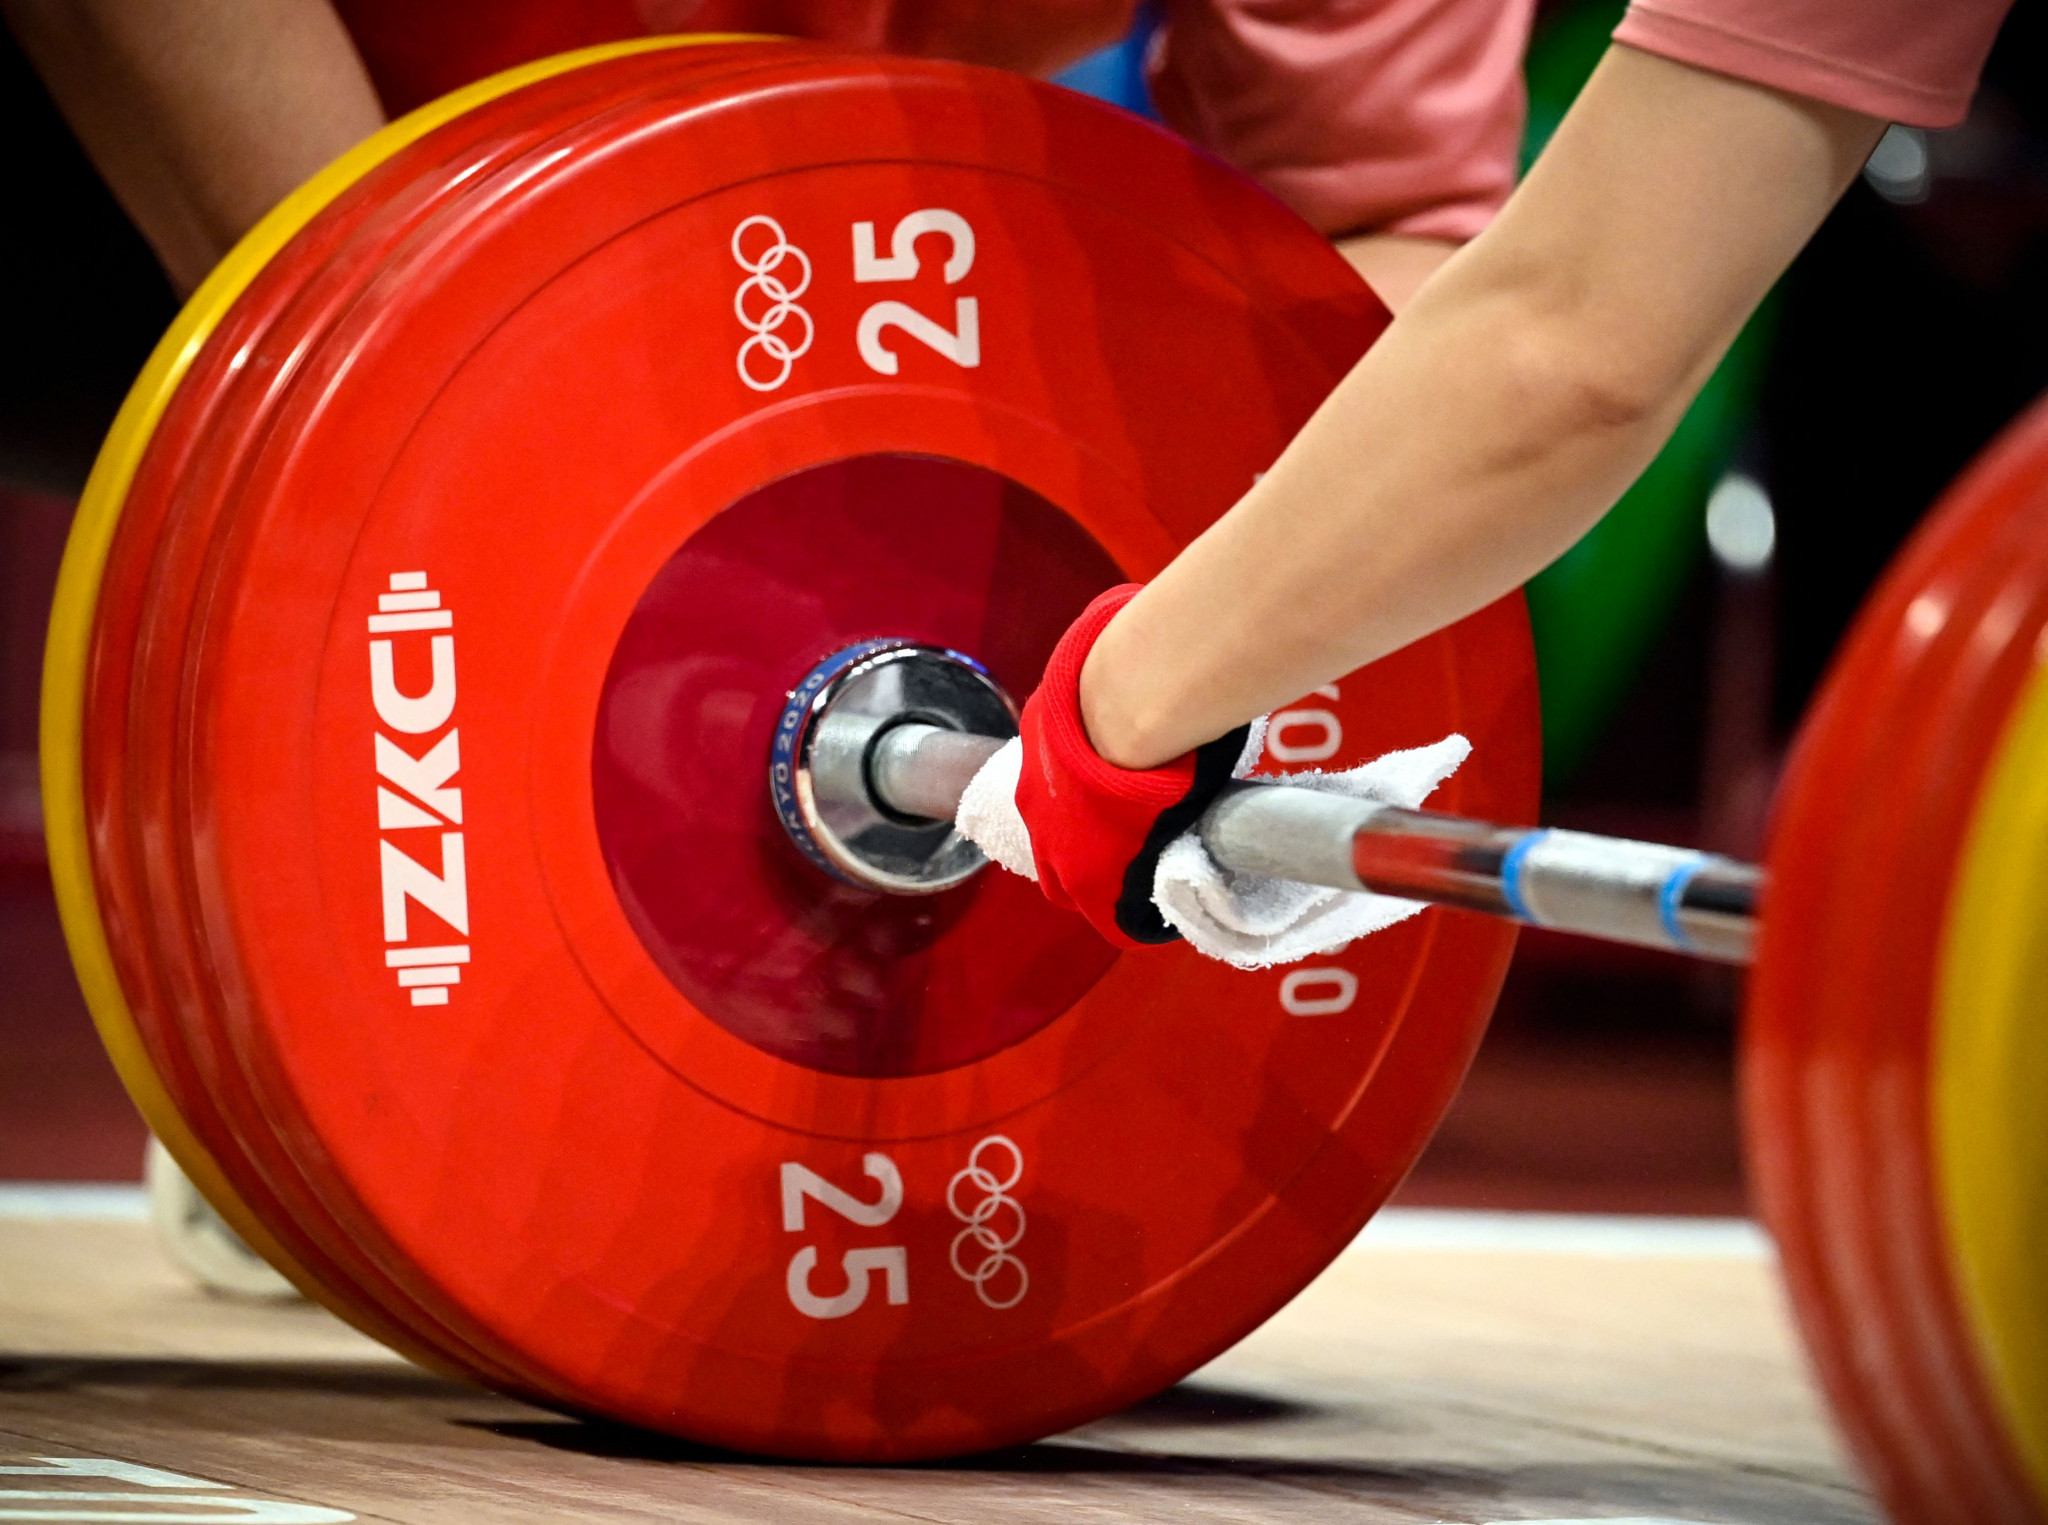 Weightlifting has been provisionally removed from the Los Angeles 2028 Olympic programme amid governance concerns ©Getty Images